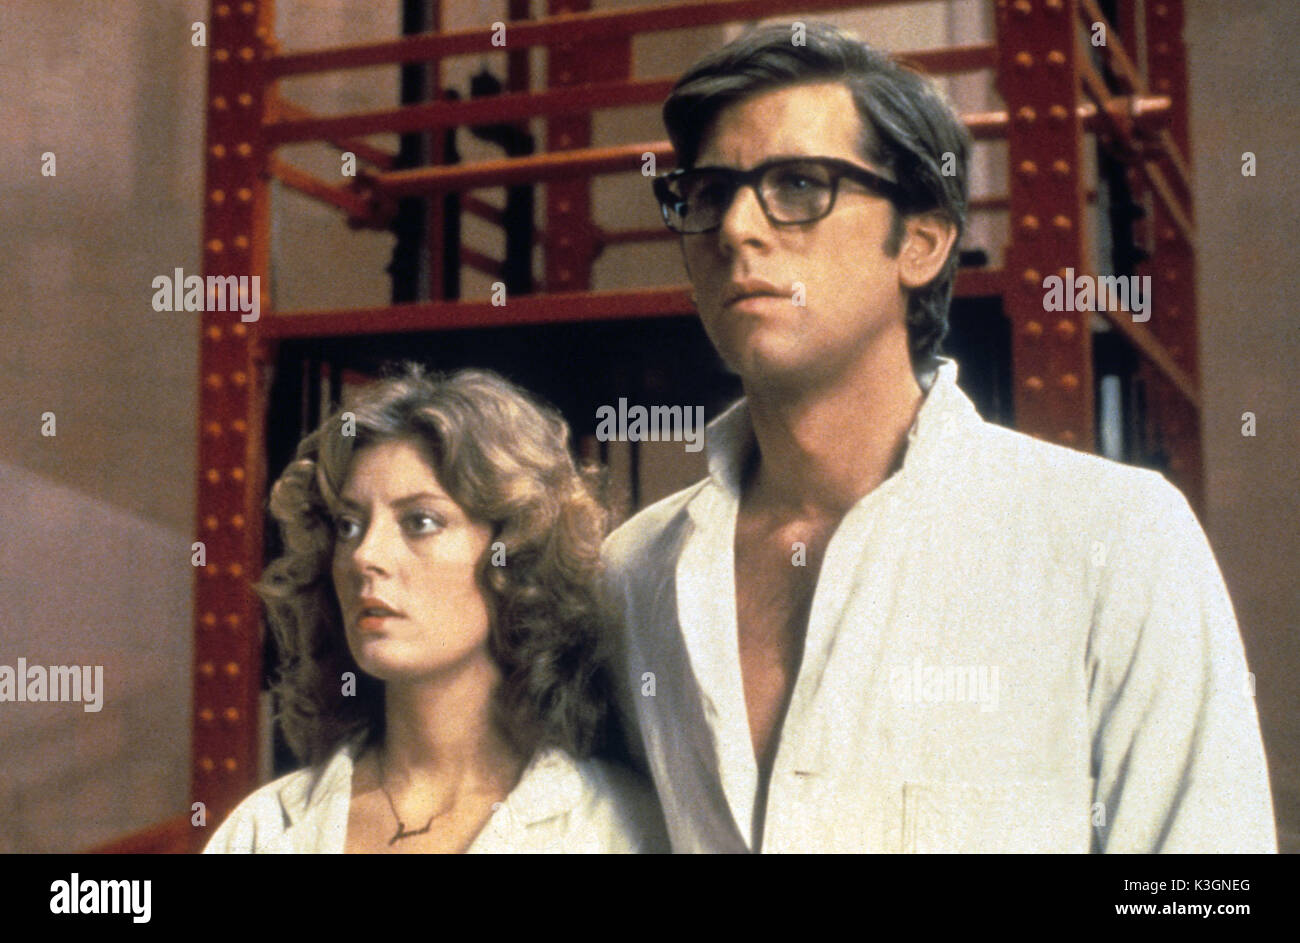 THE ROCKY HORROR PICTURE SHOW SUSAN SARANDON, BARRY BOSTWICK Date: 1975  Stock Photo - Alamy